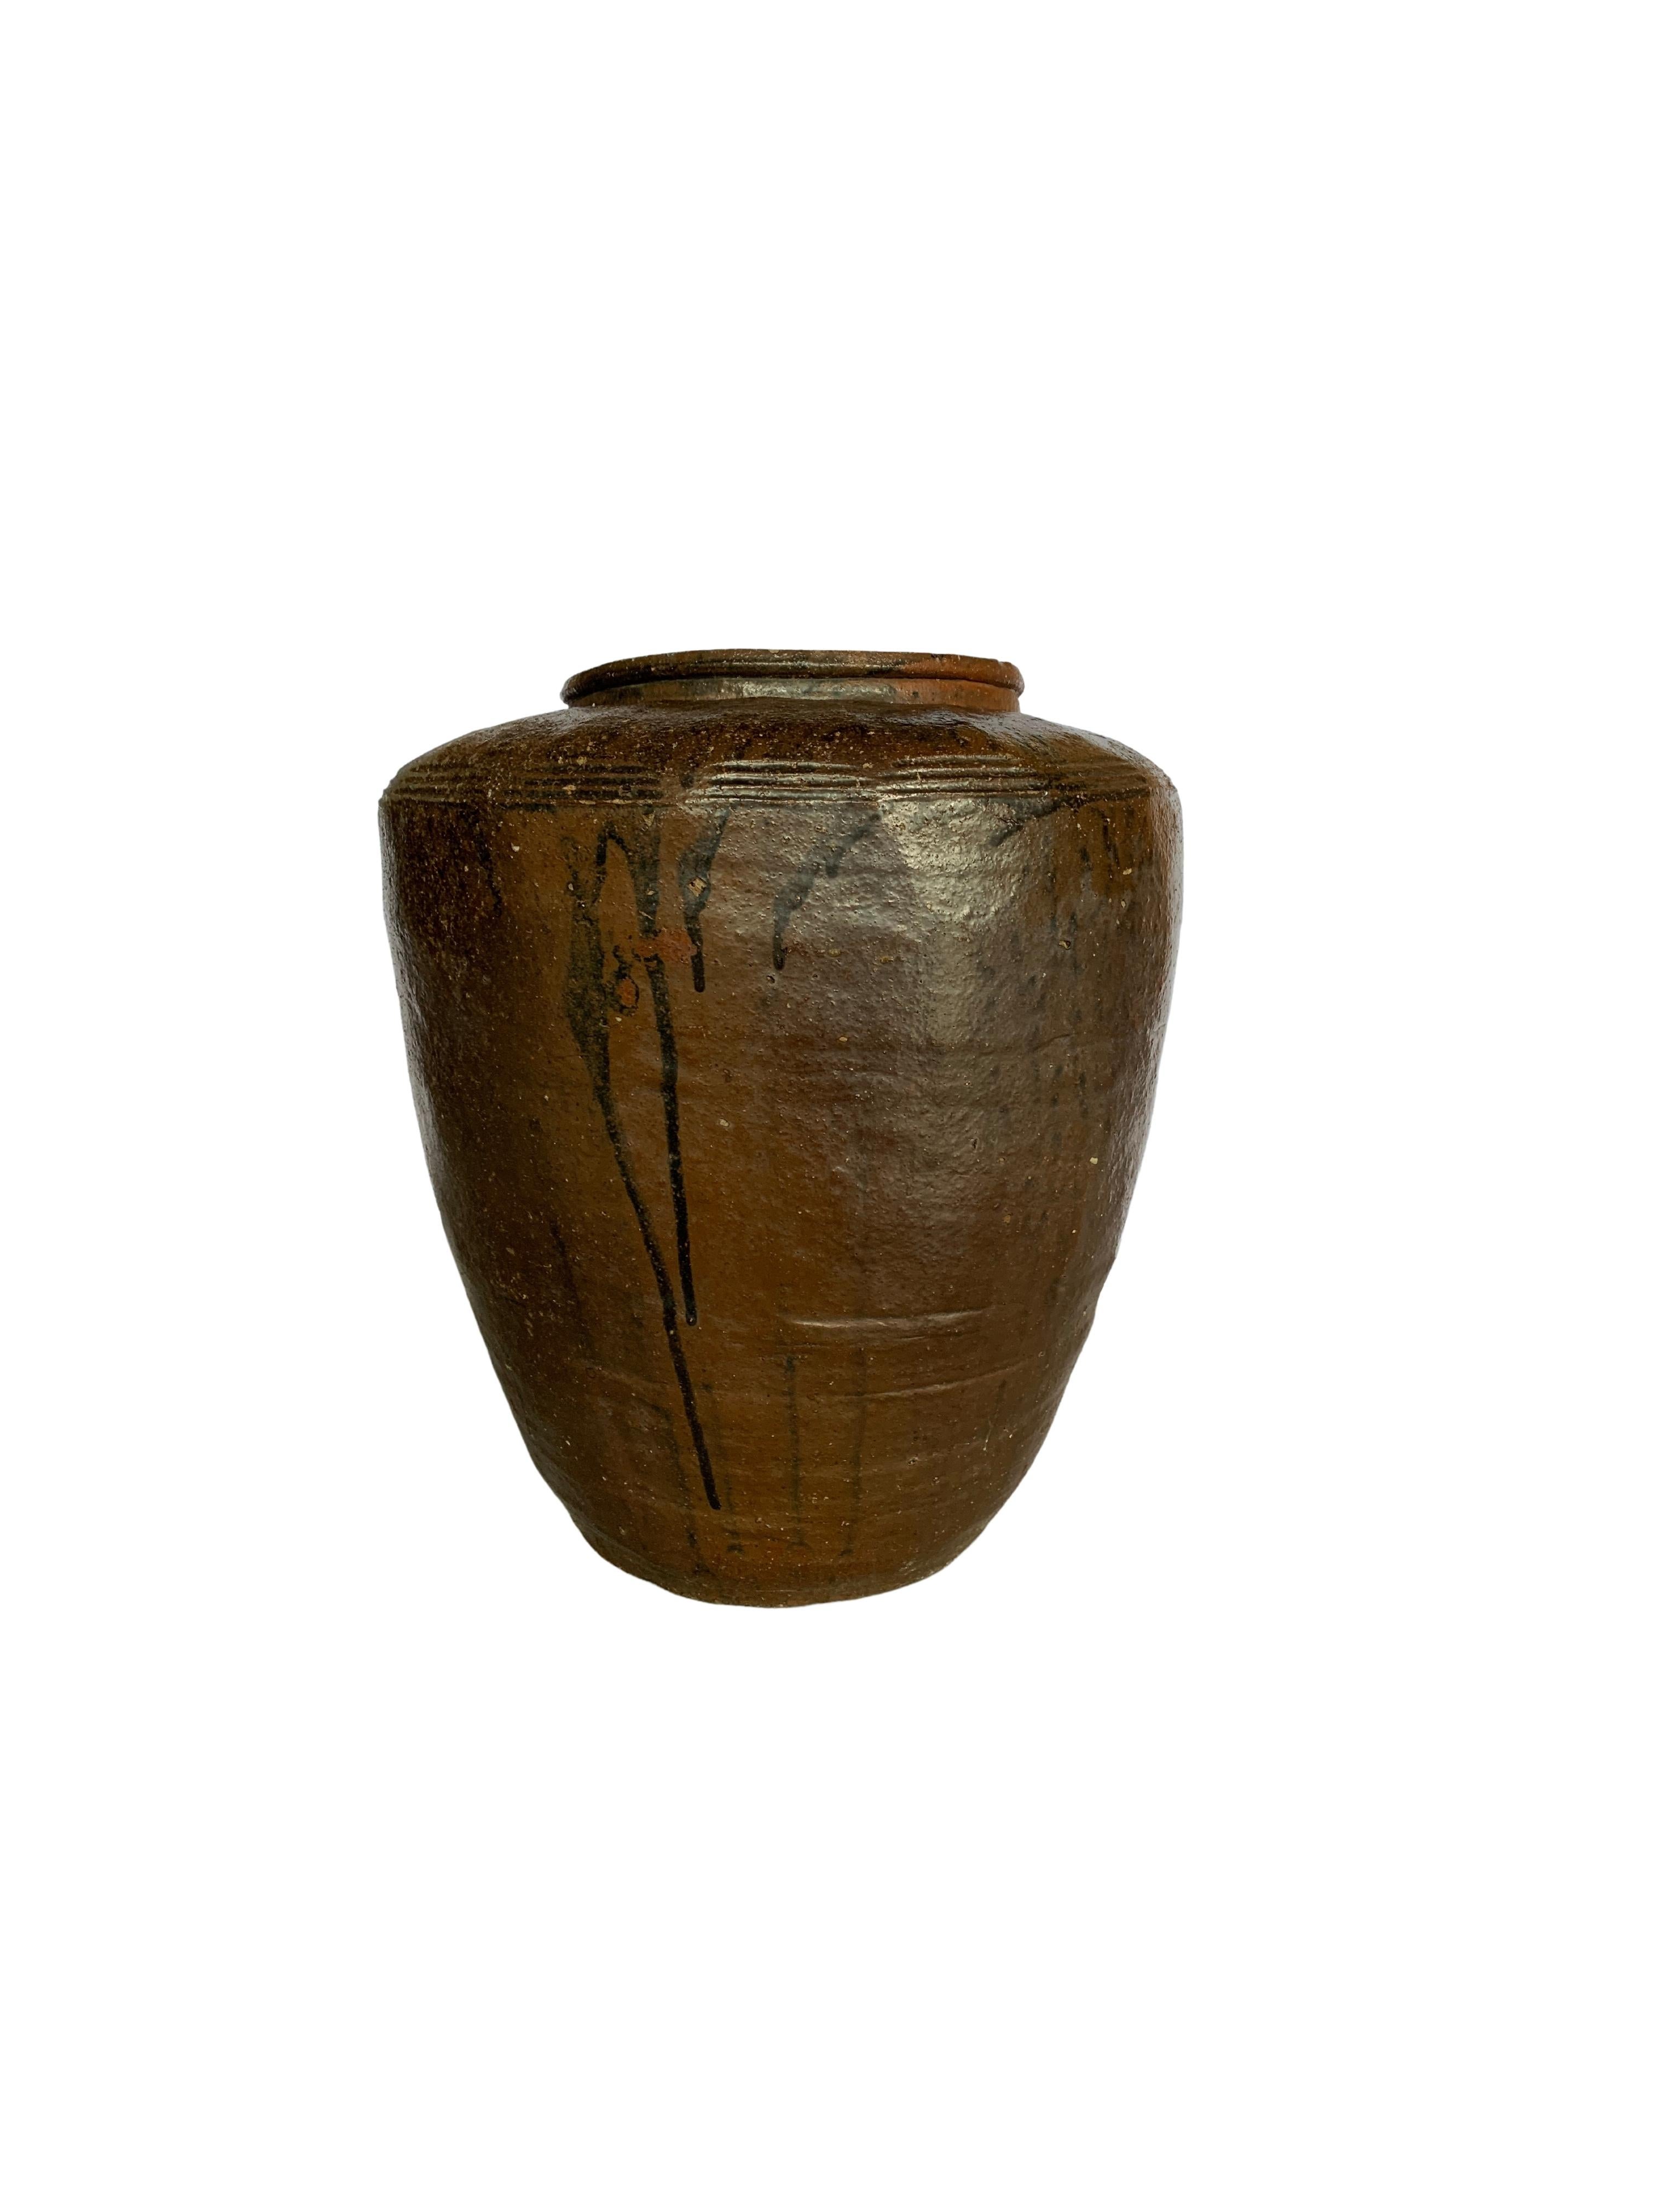 This Antique Jar dating to the early 1900s once served the purpose of crafting salty eggs. The jar features a wonderful brown glaze with some areas of dripping black. There is a ridged pattern finish near to the Jar's rim. The fading and markings to